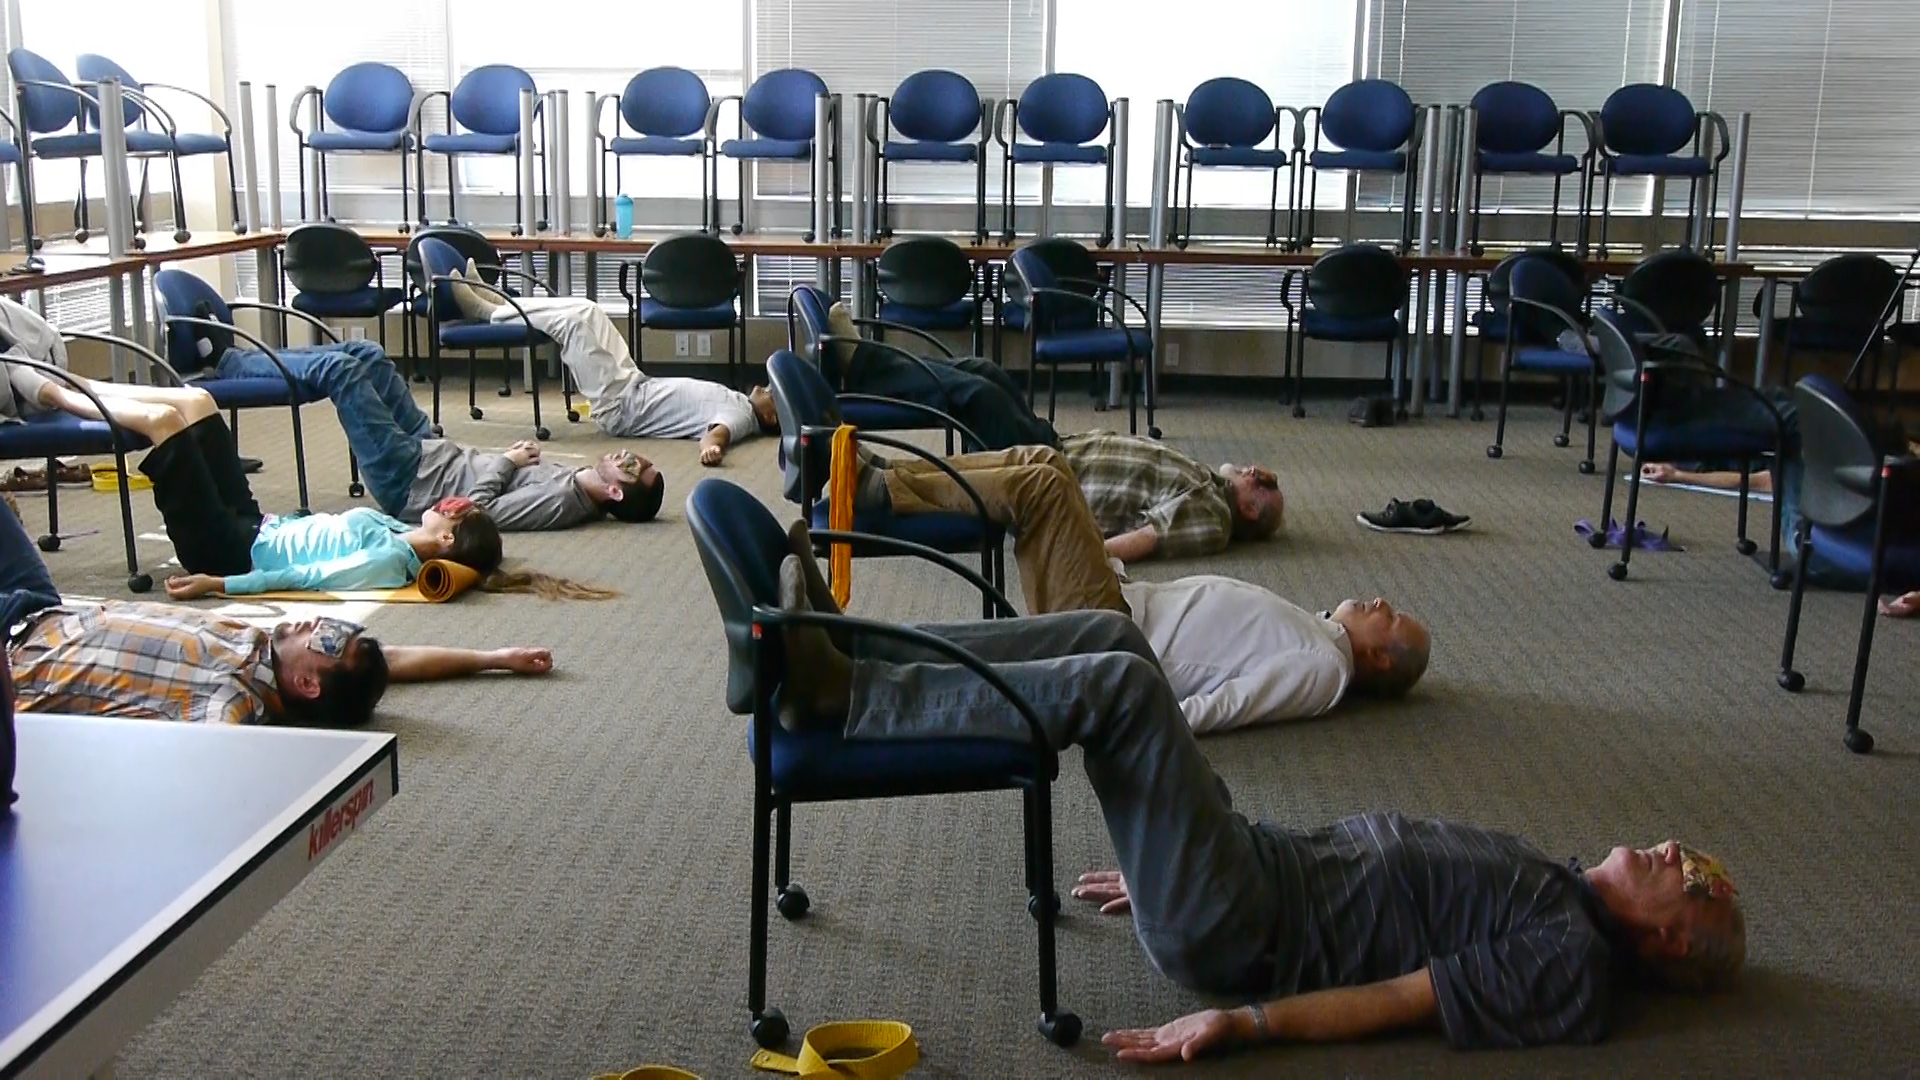 Savasana in a Conference room with Sherry Zak Morris